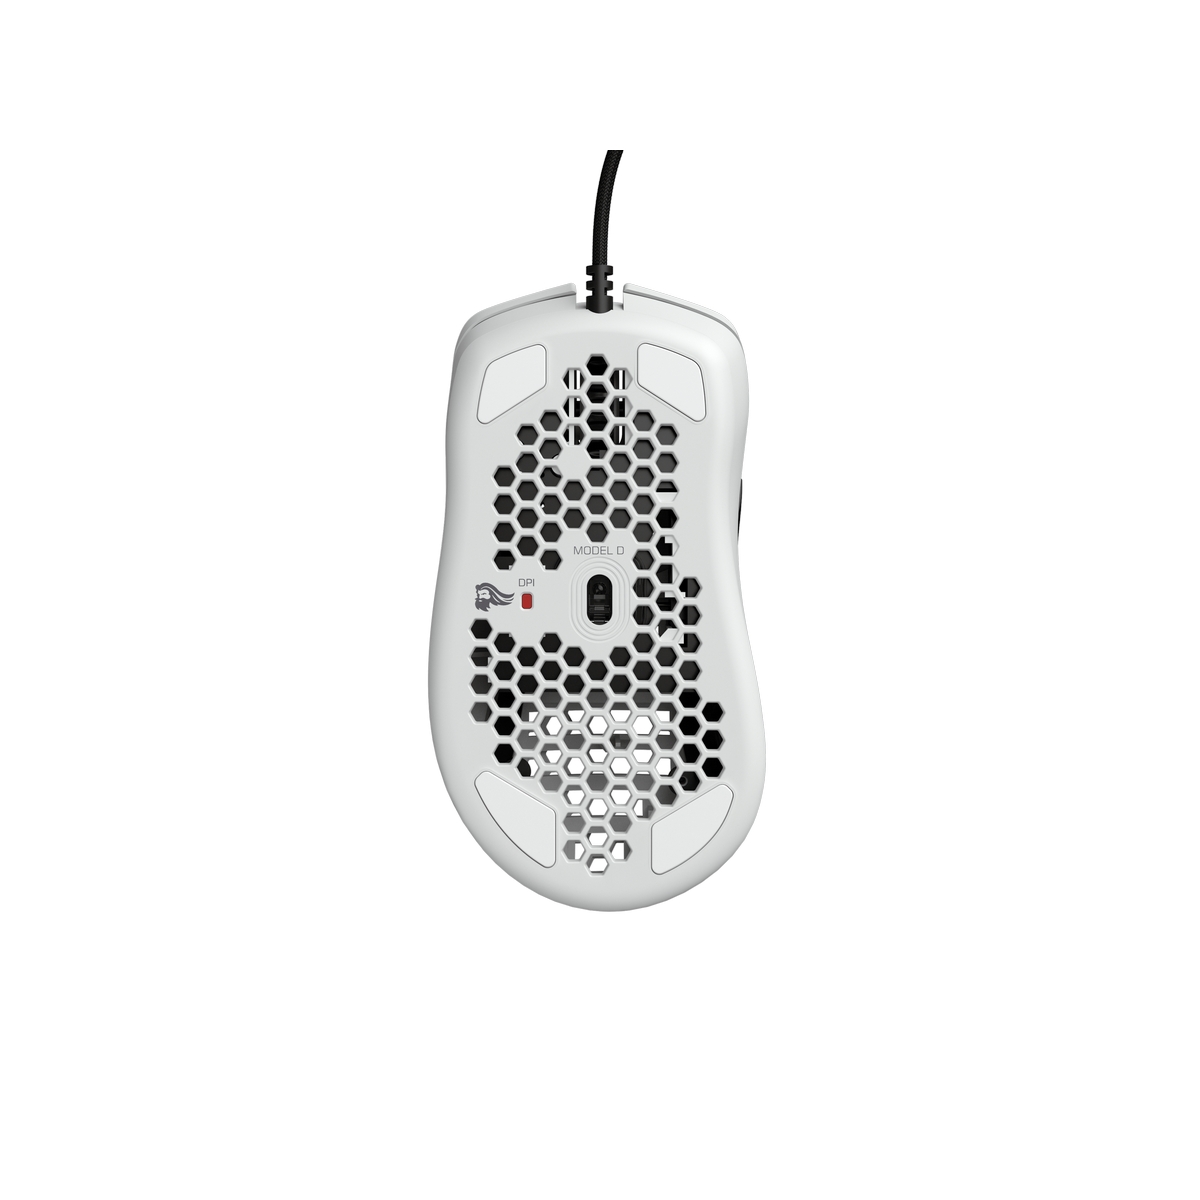 Glorious - Glorious Model D USB RGB Optical Gaming Mouse - Matte White (GD-WHITE)